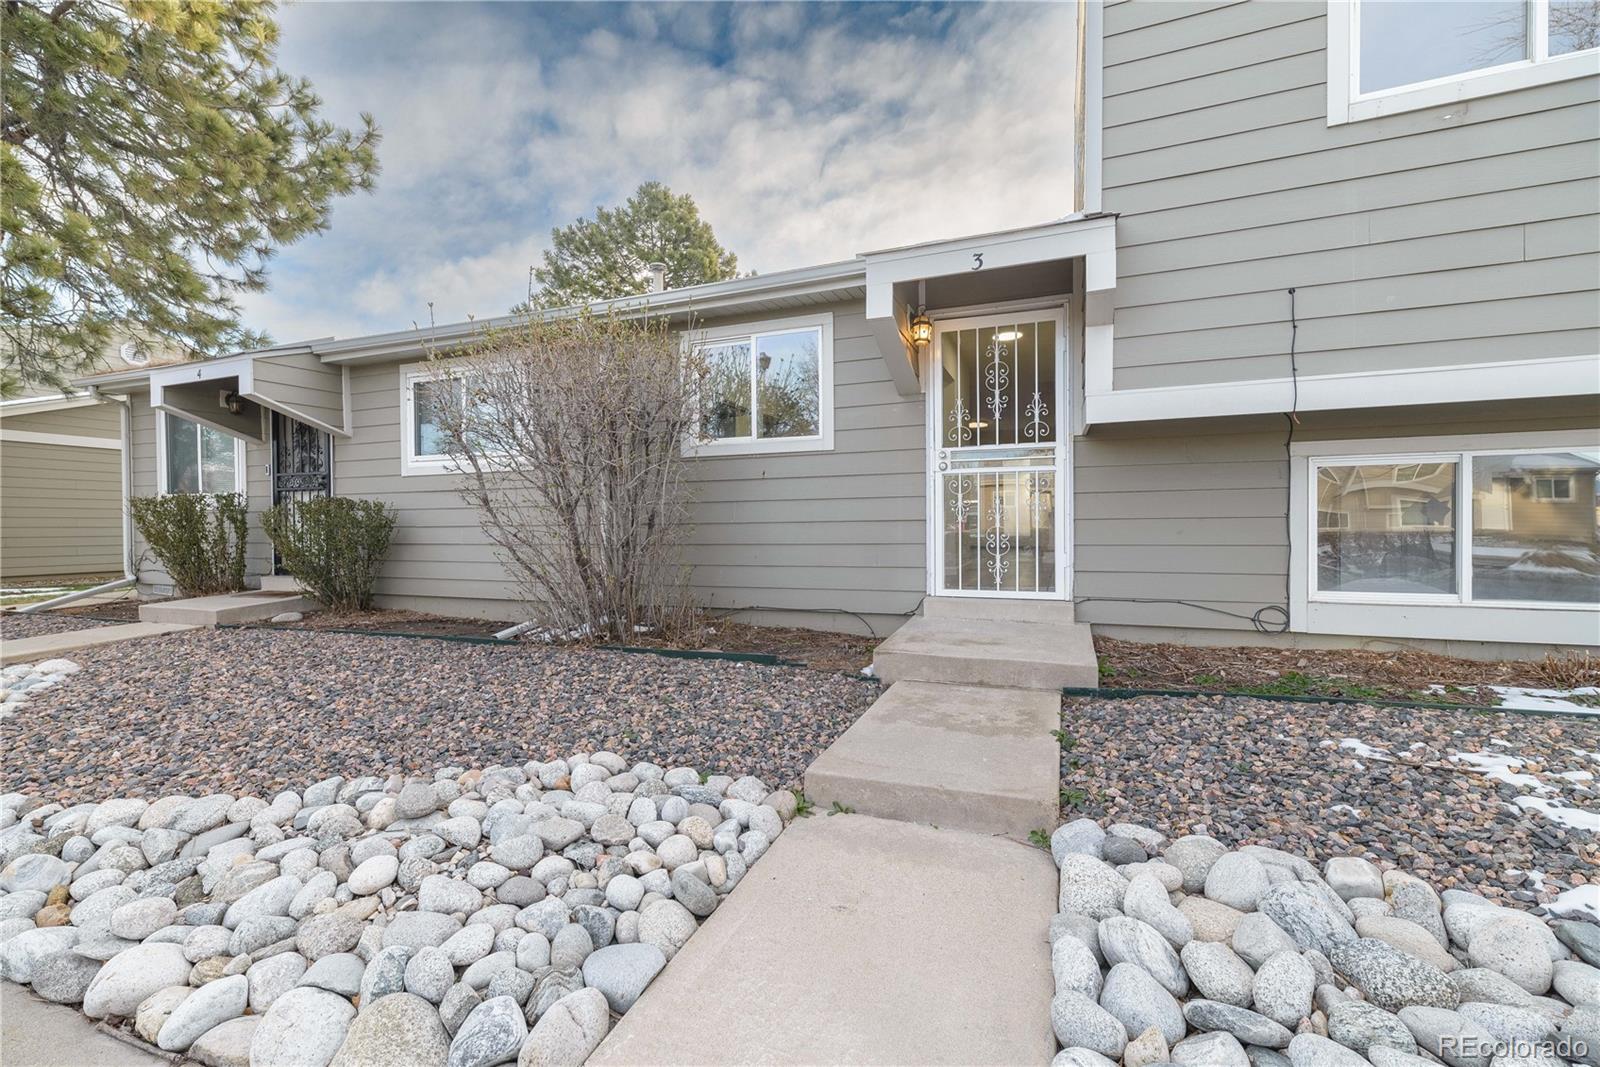 Report Image for 5711 W 92nd Avenue,Westminster, Colorado